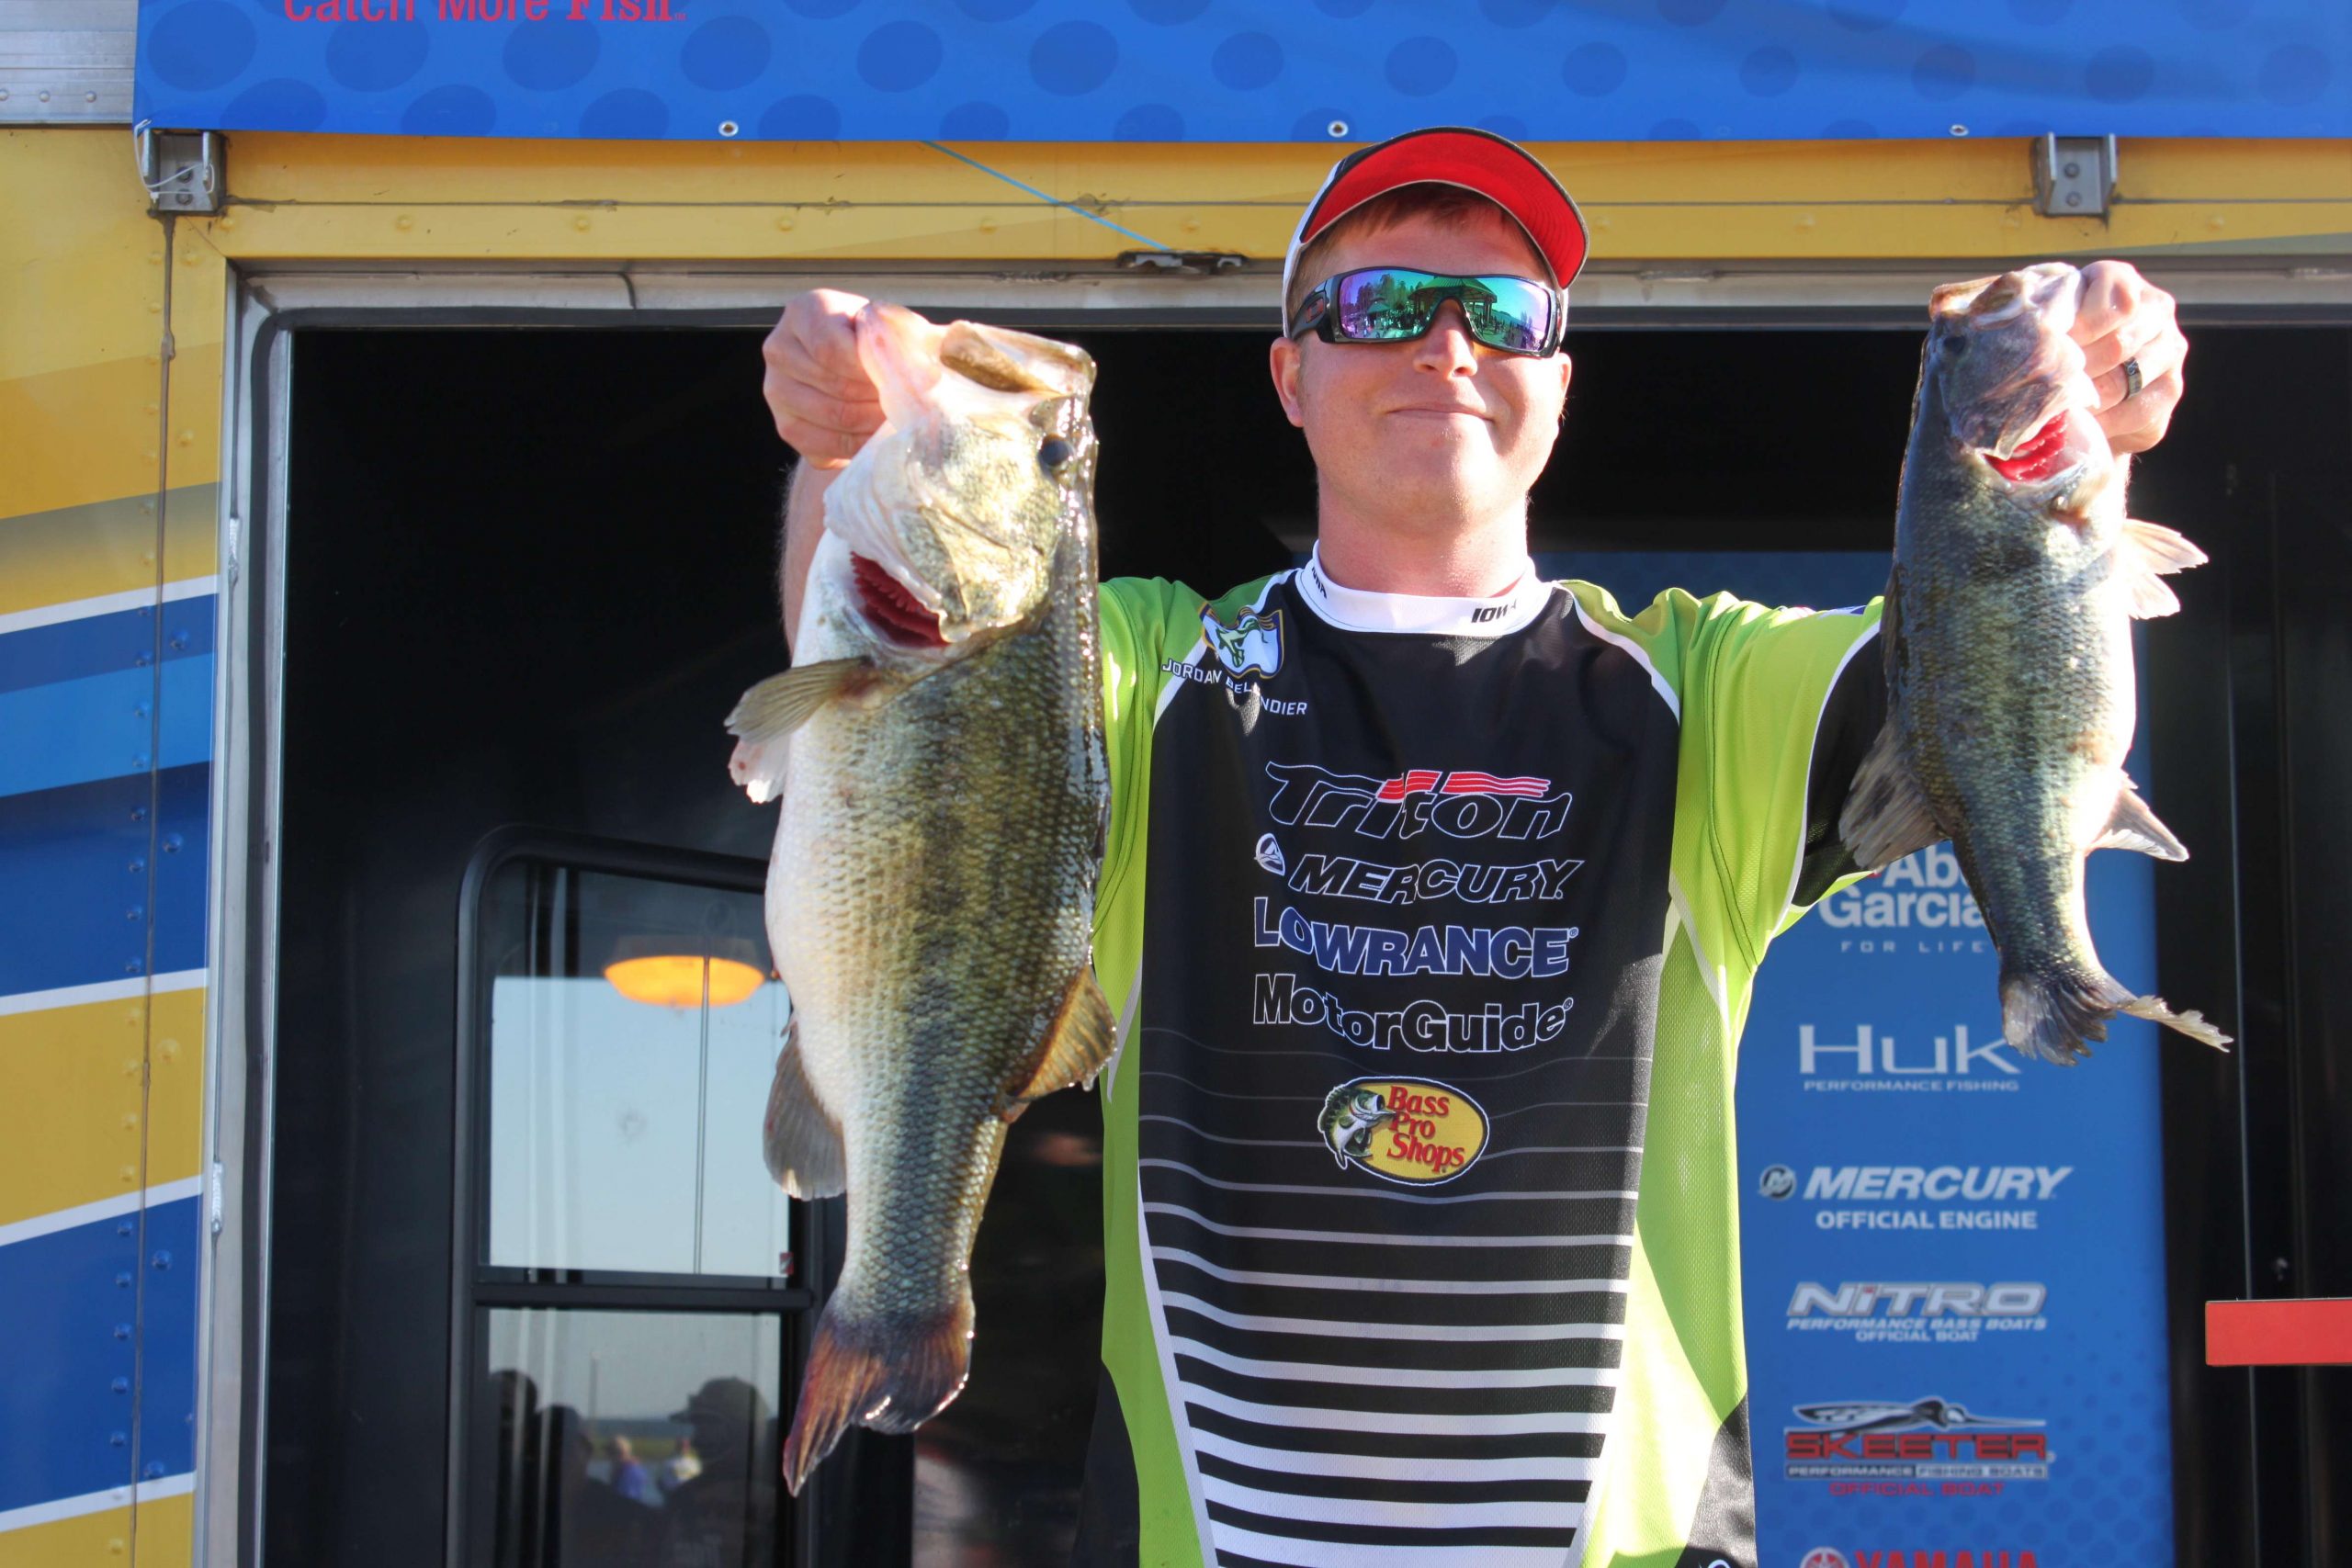 Jordan Bellendier of Iowa boated five bass that weighed 18 pounds even, including the 7-2 monster heâs holding here. Bellendier is in great position heading into Day 2 with a hold on eighth place among boaters.